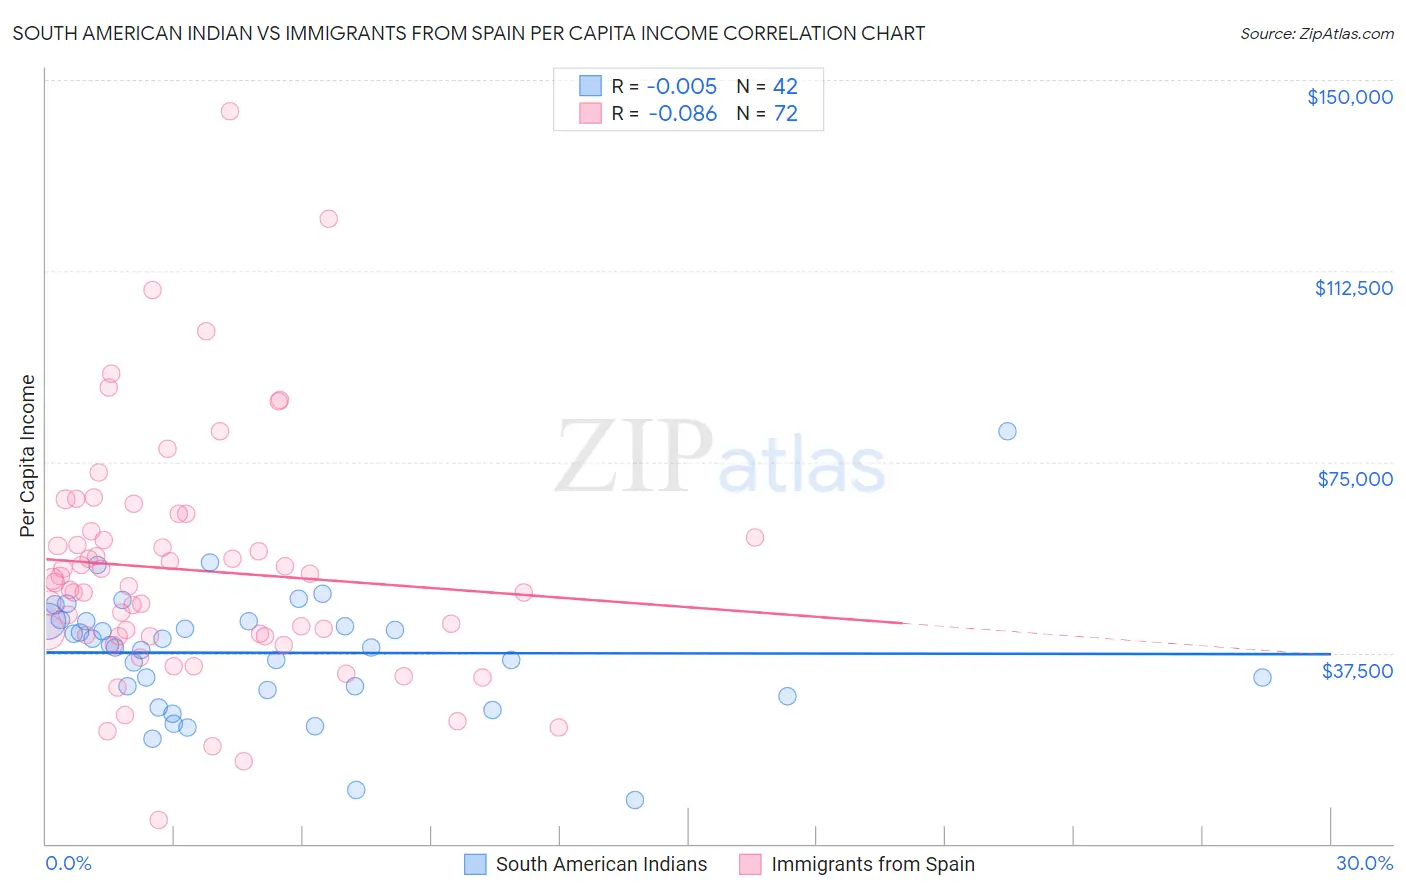 South American Indian vs Immigrants from Spain Per Capita Income